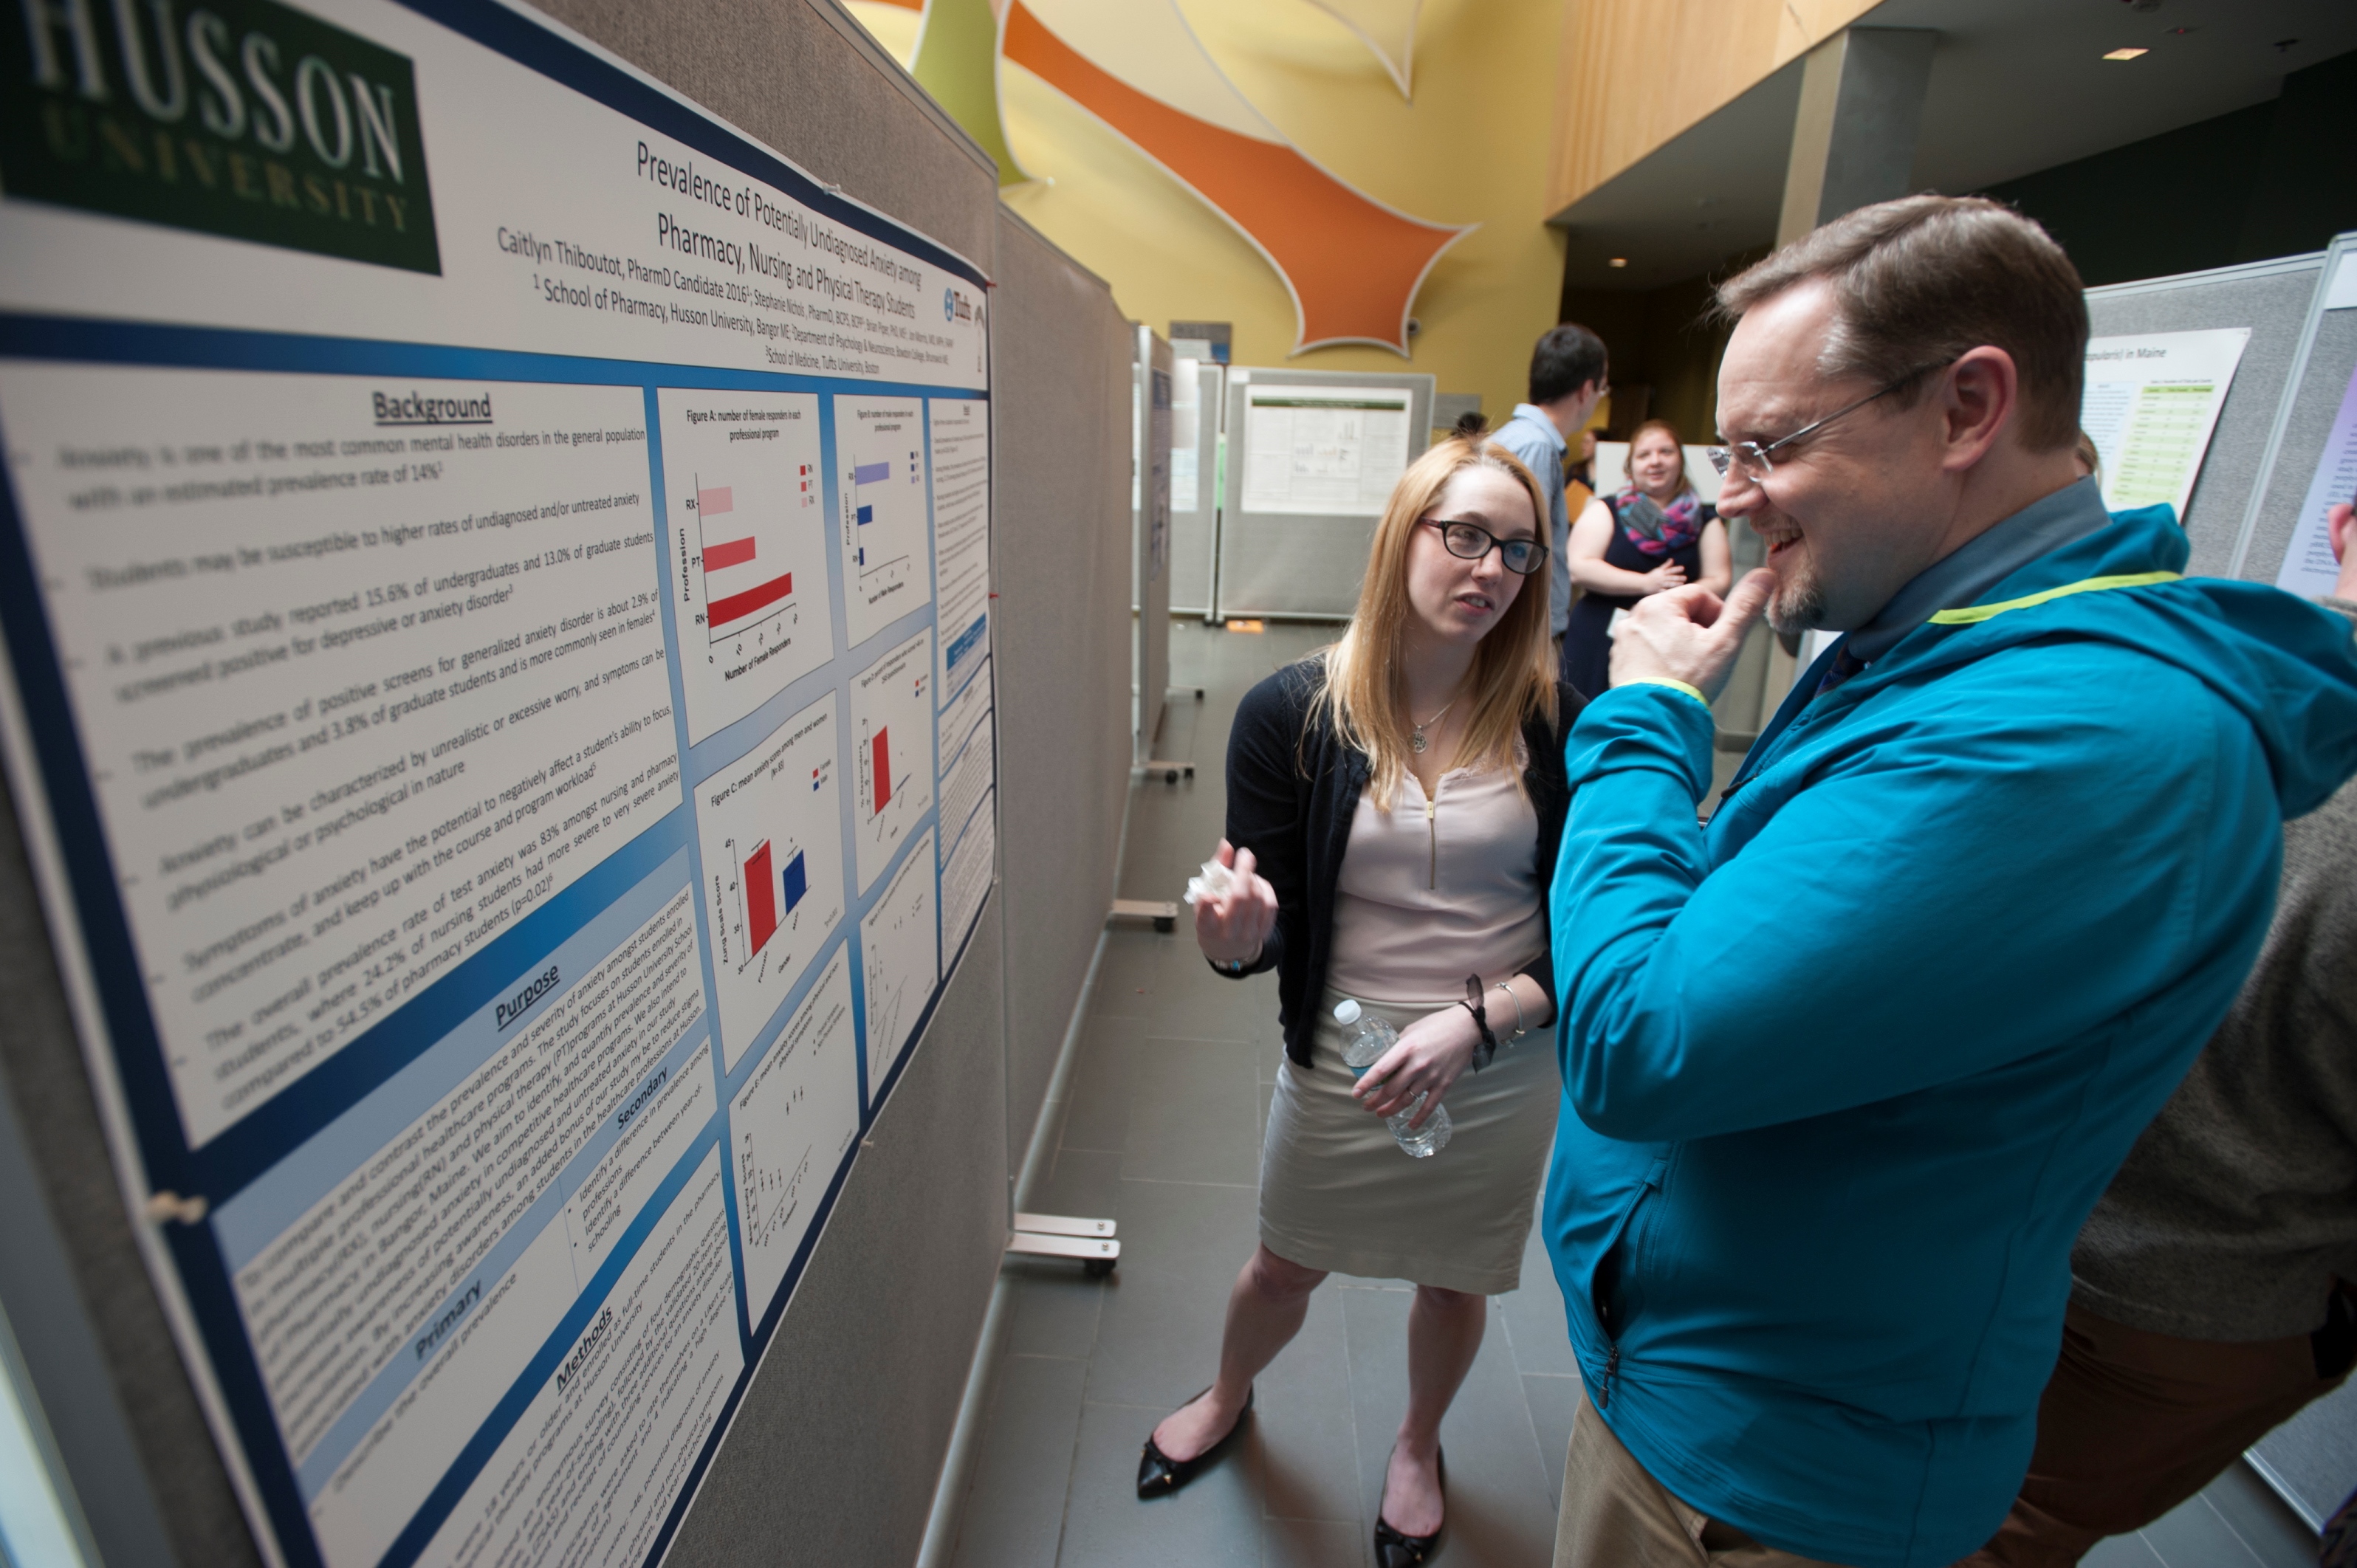 Husson University Vice President of Enrollment Jonathan Henry listens as a student explains her research into undiagnosed anxiety disorders.